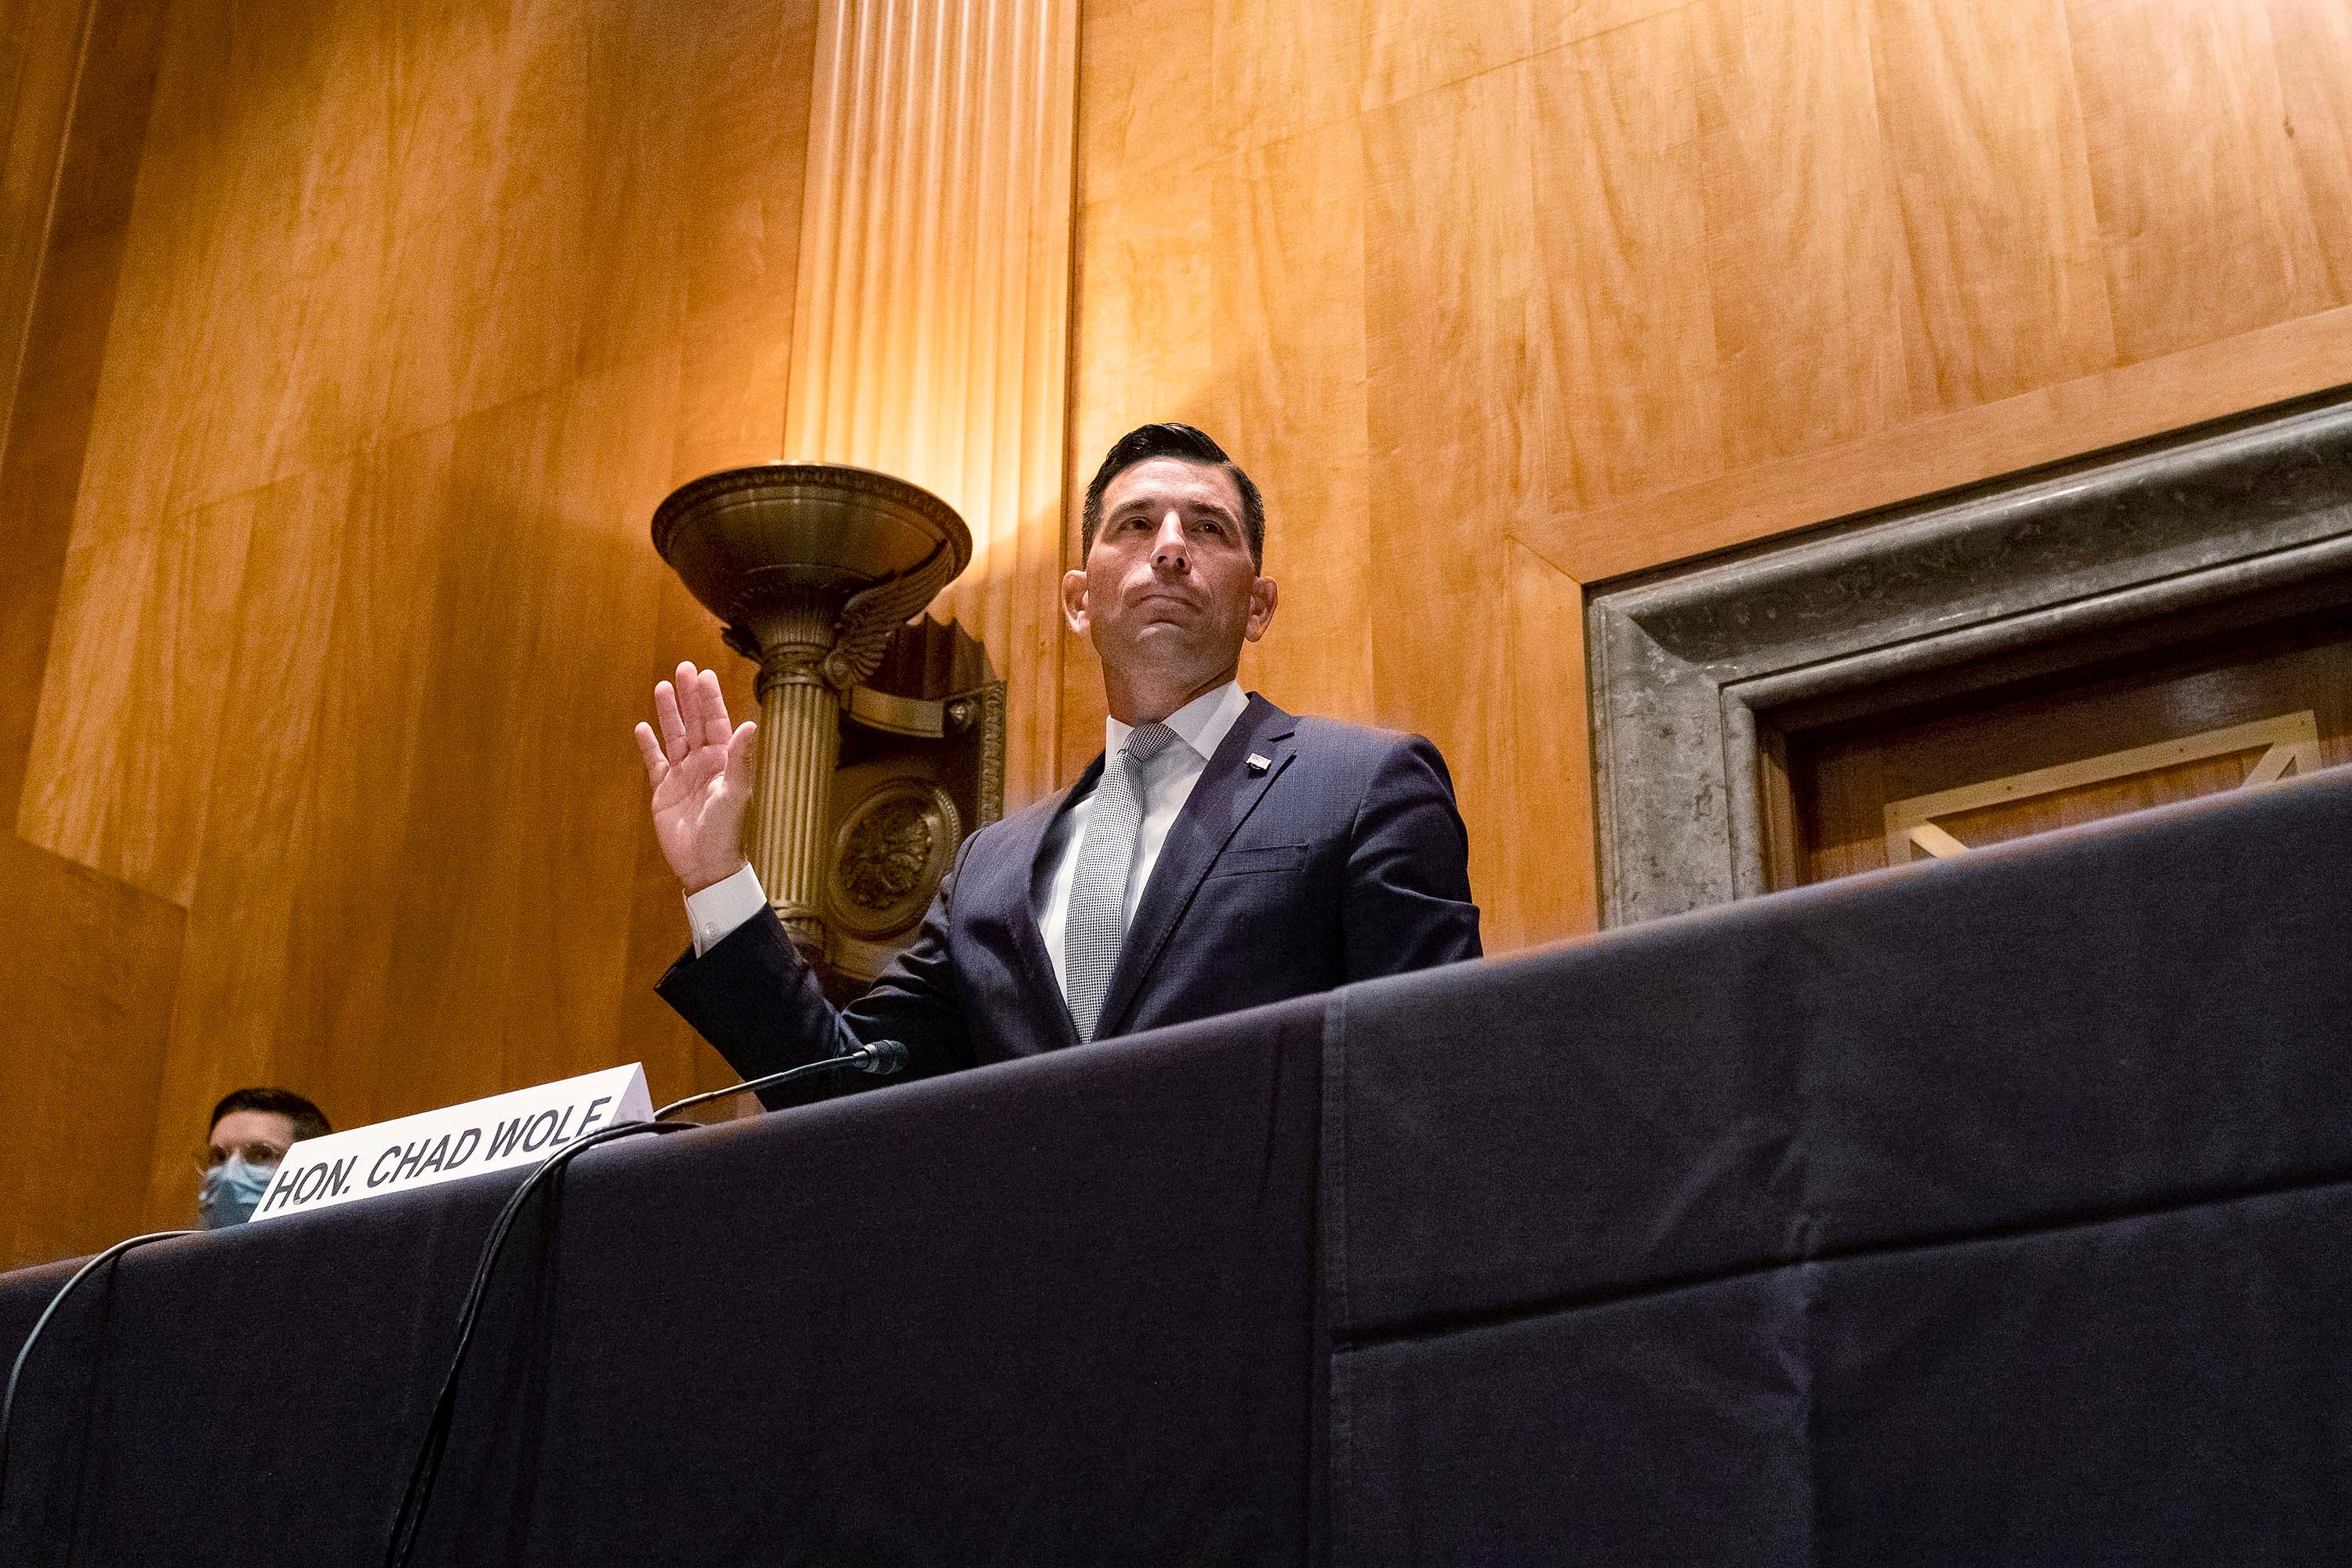 The acting secretary of the US Department of Homeland Security, Chad Wolf, raises his right hand to swear in during a Senate Homeland Security and Governmental Affairs Committee confirmation hearing on September 23, 2020 in Washington, DC.